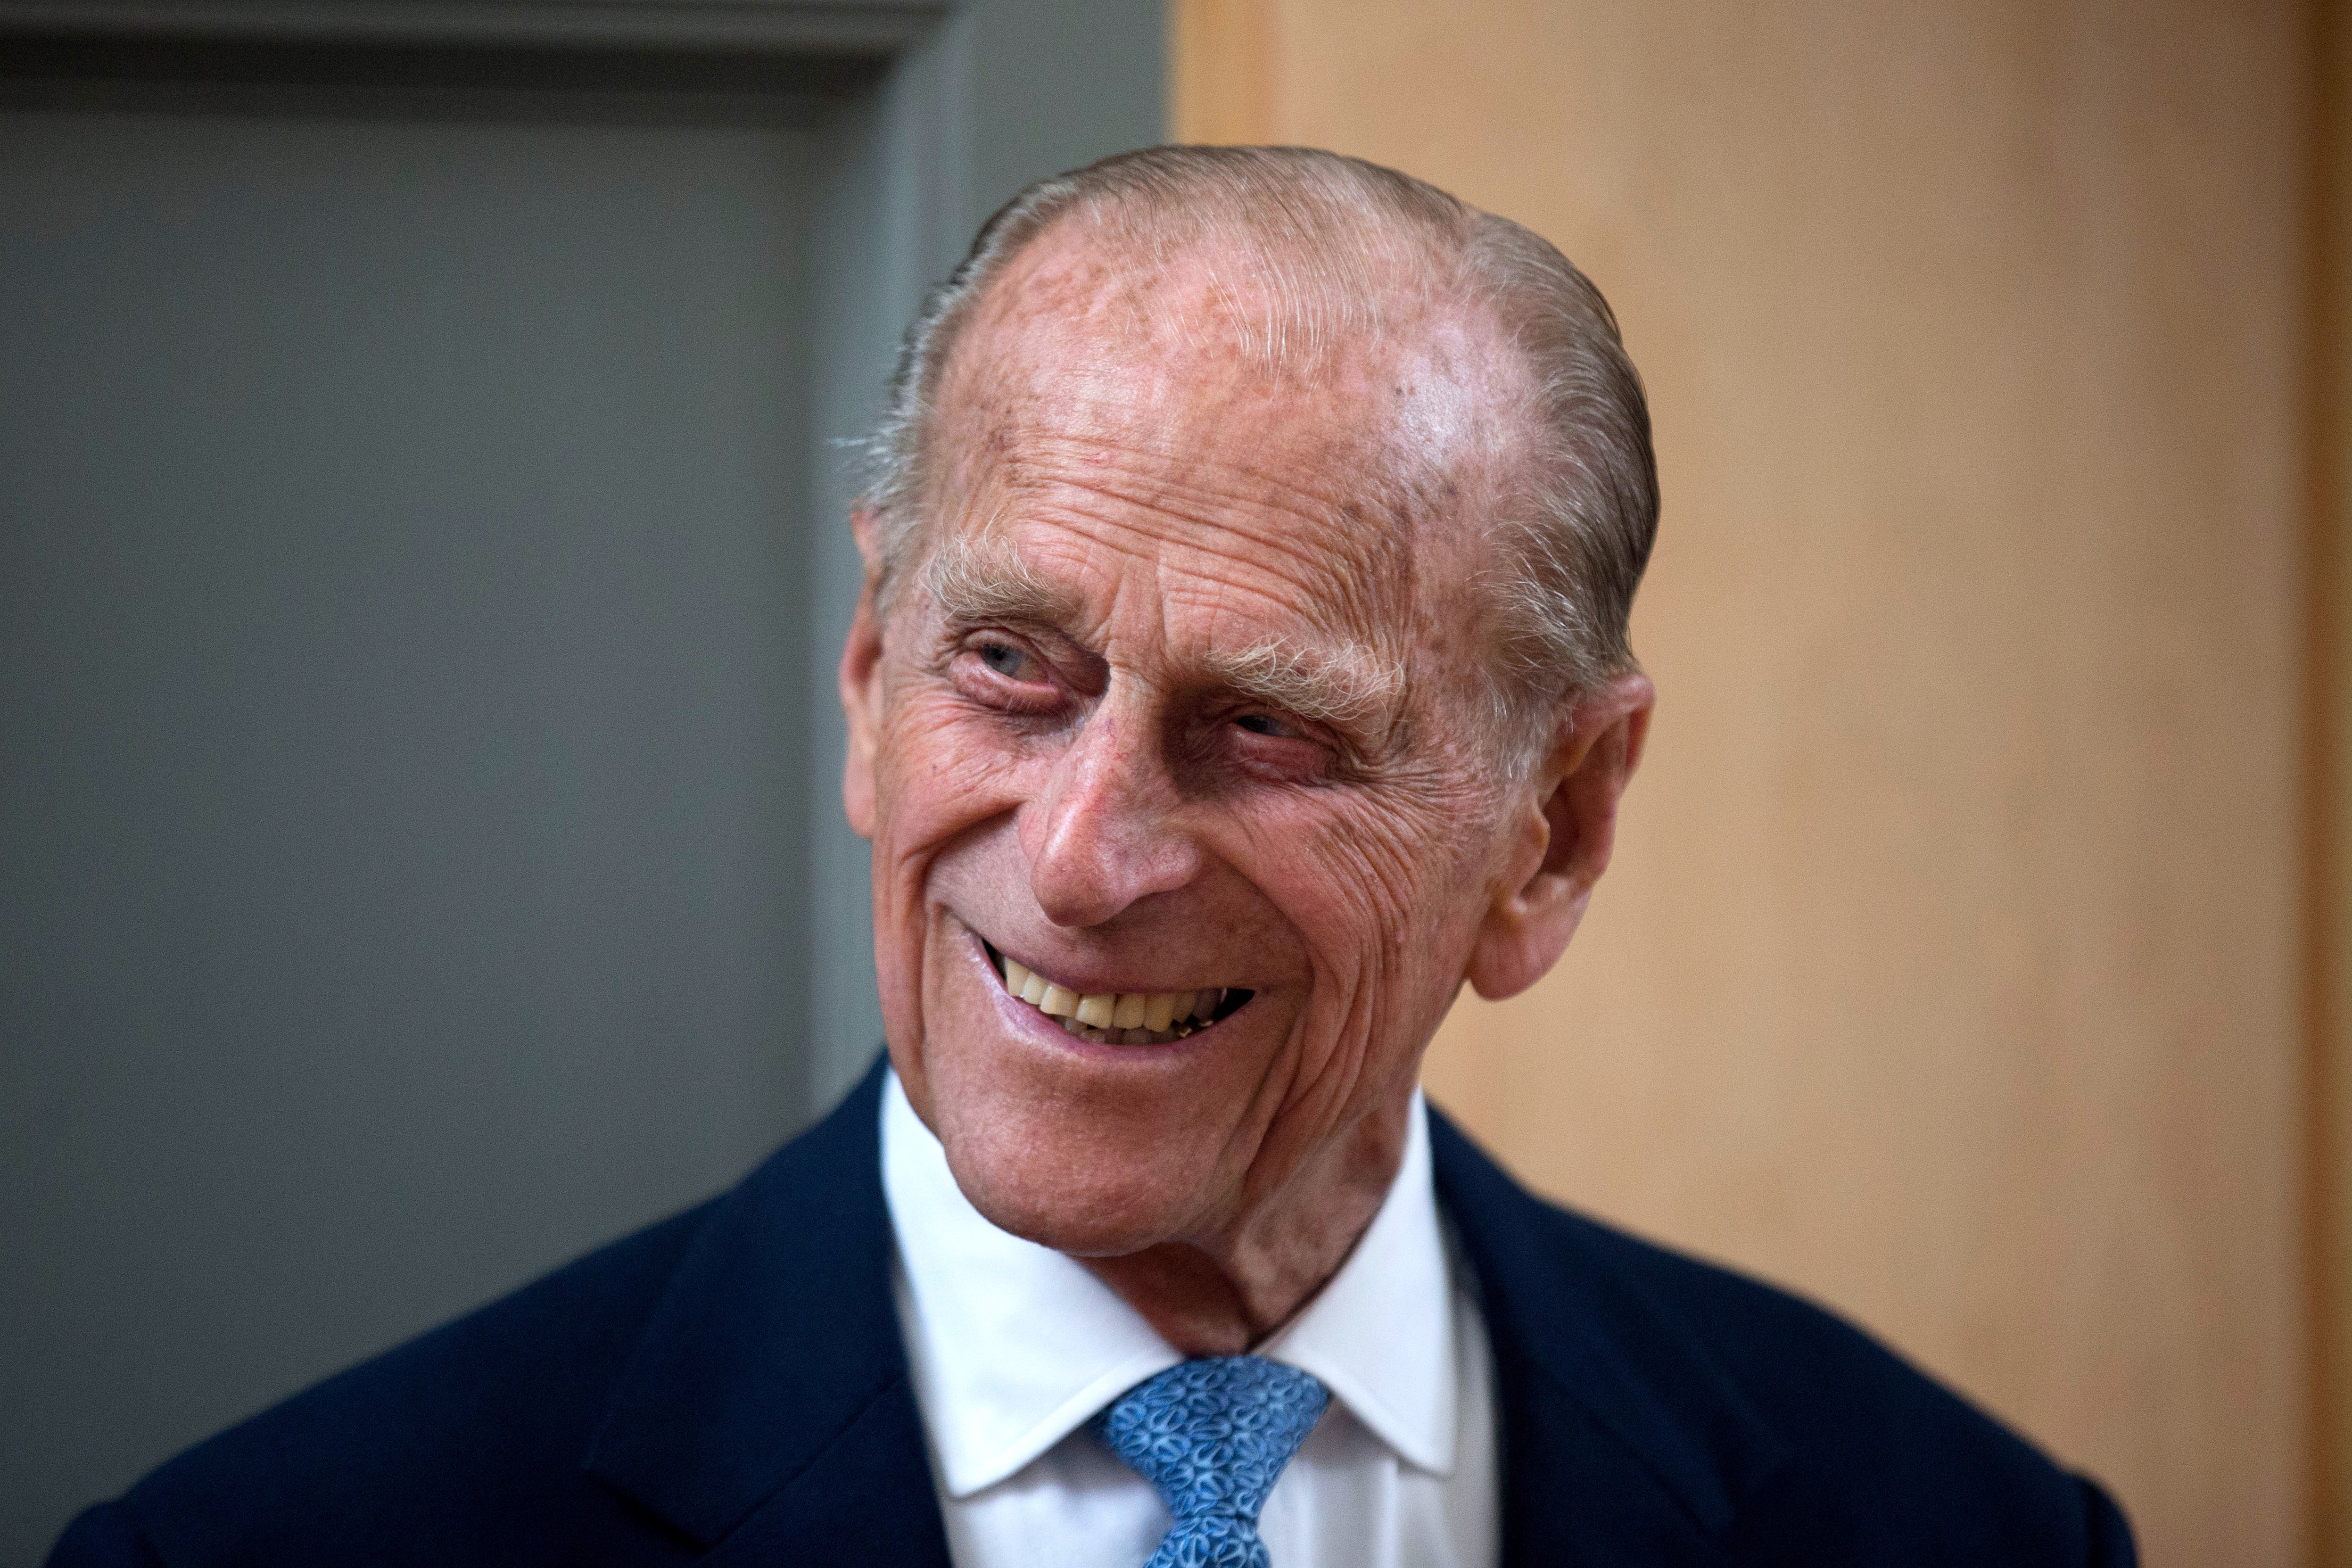 Prince Philip’s funeral will be held at Windsor Castle on Saturday